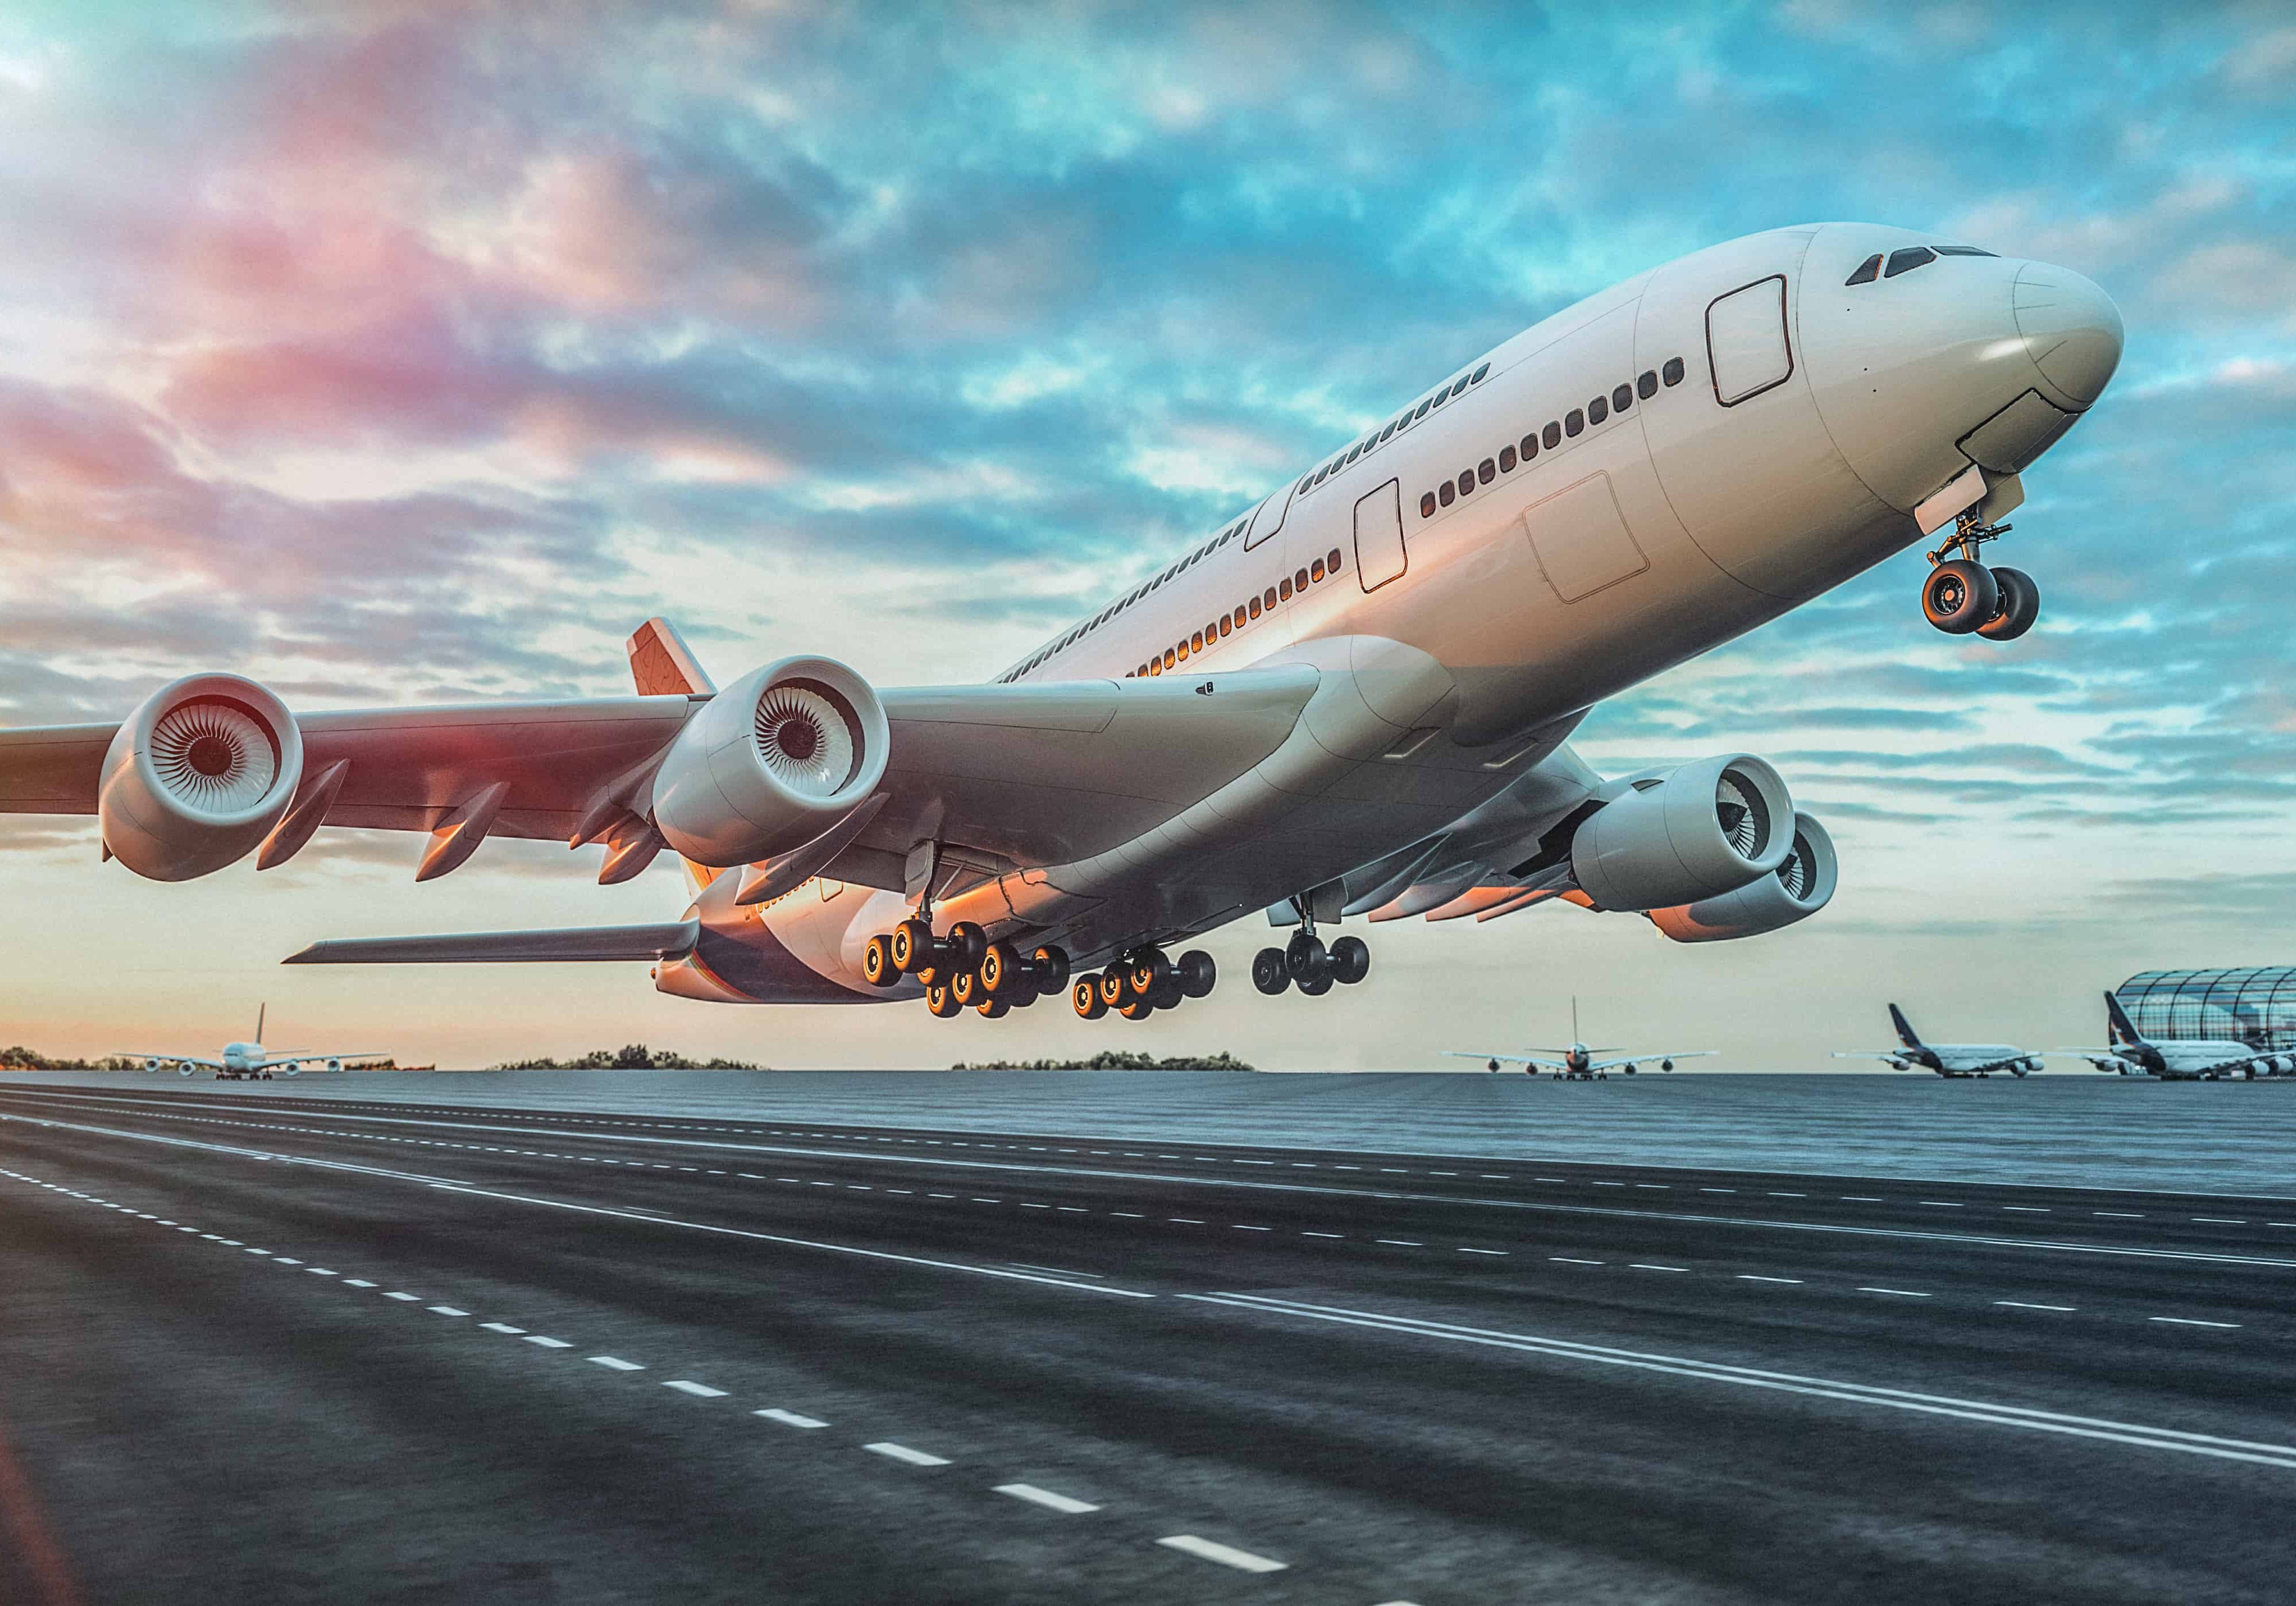 Airplane taking off from the airport. 3d render and illustration.